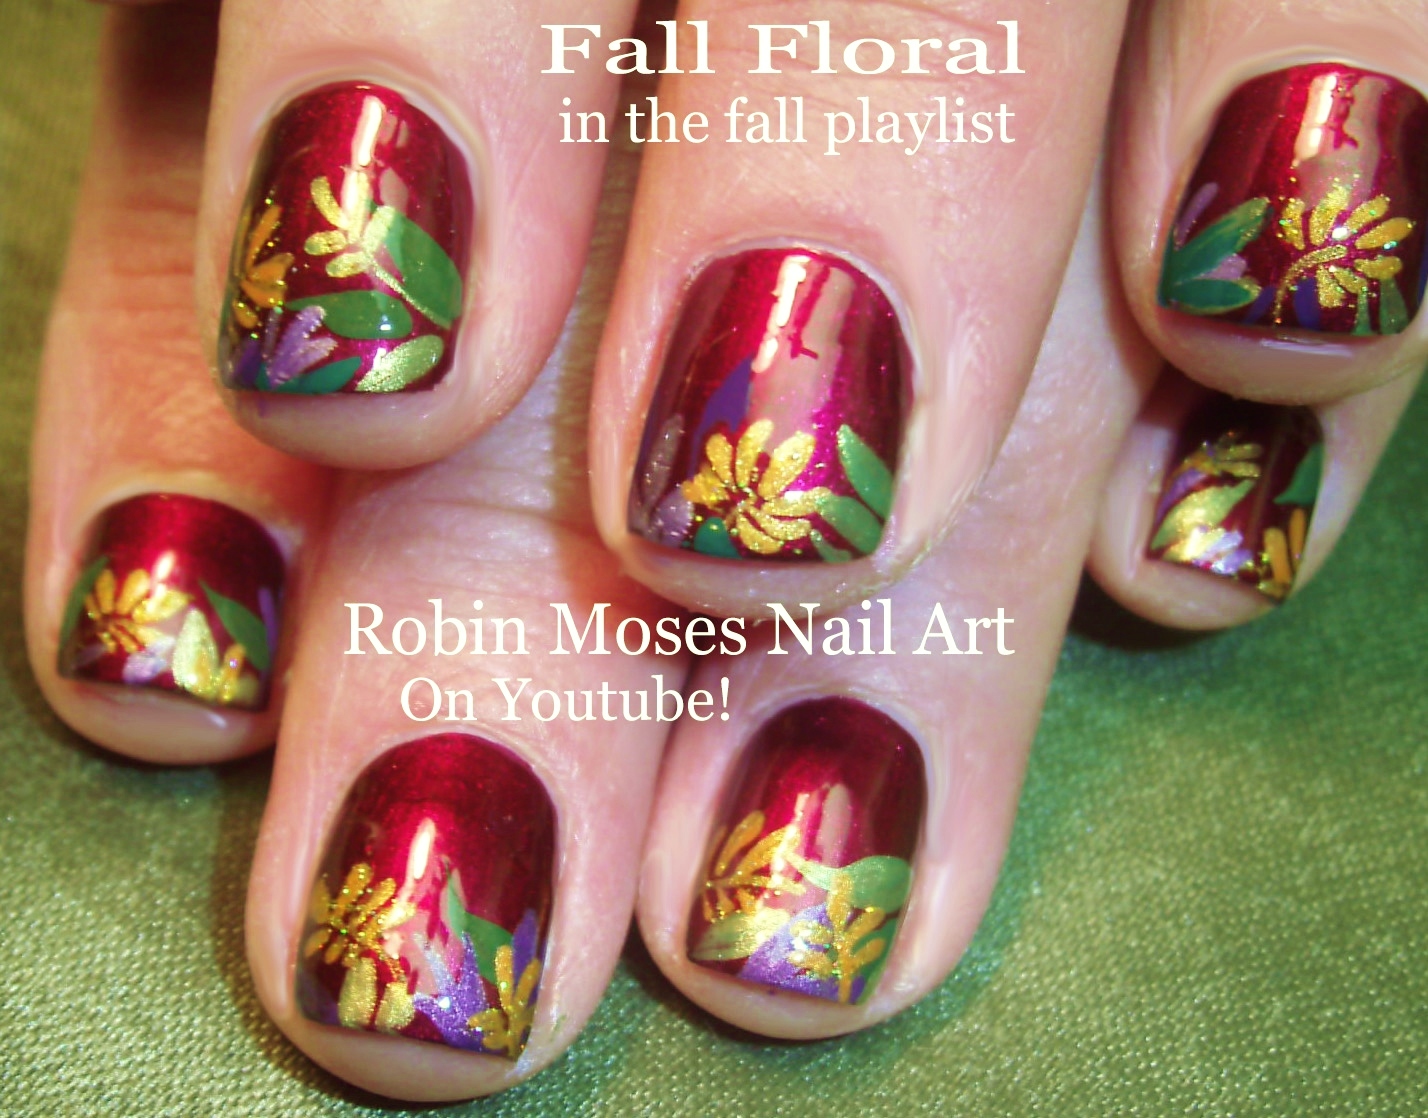 6. Cute Fall Nail Designs on Pinterest - wide 4